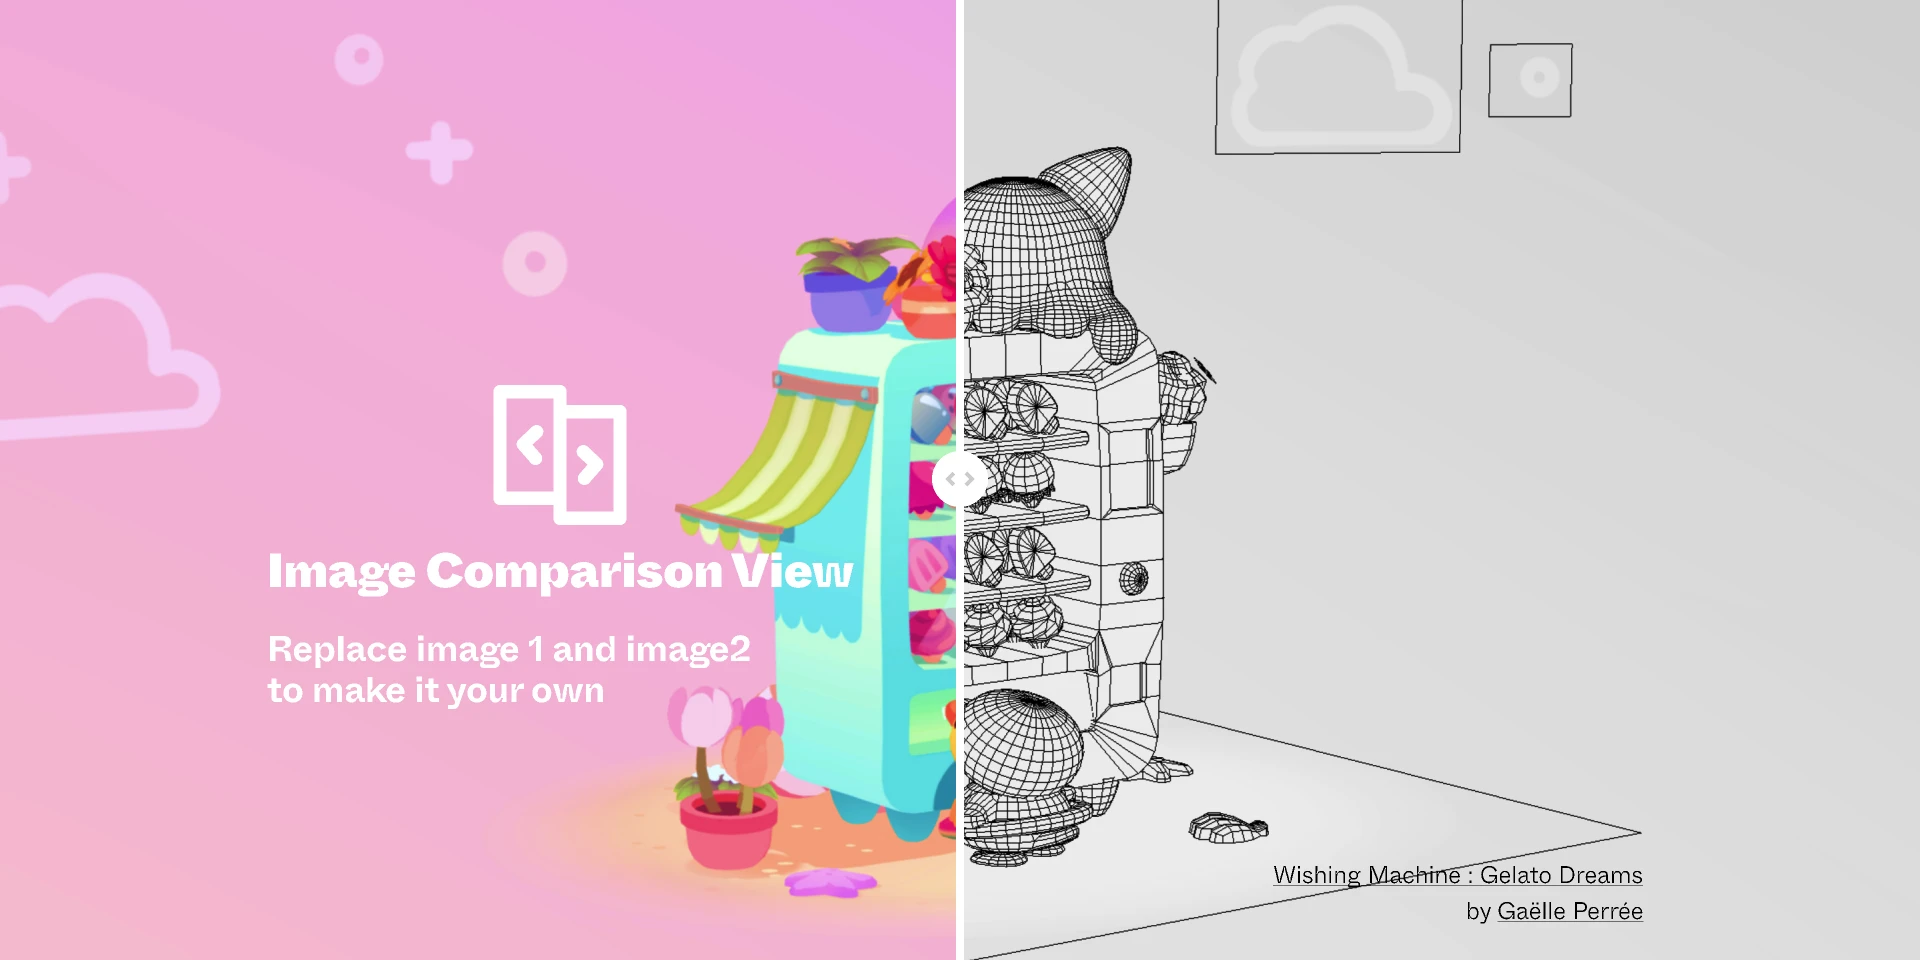 Image Comparison View for Figma and Adobe XD